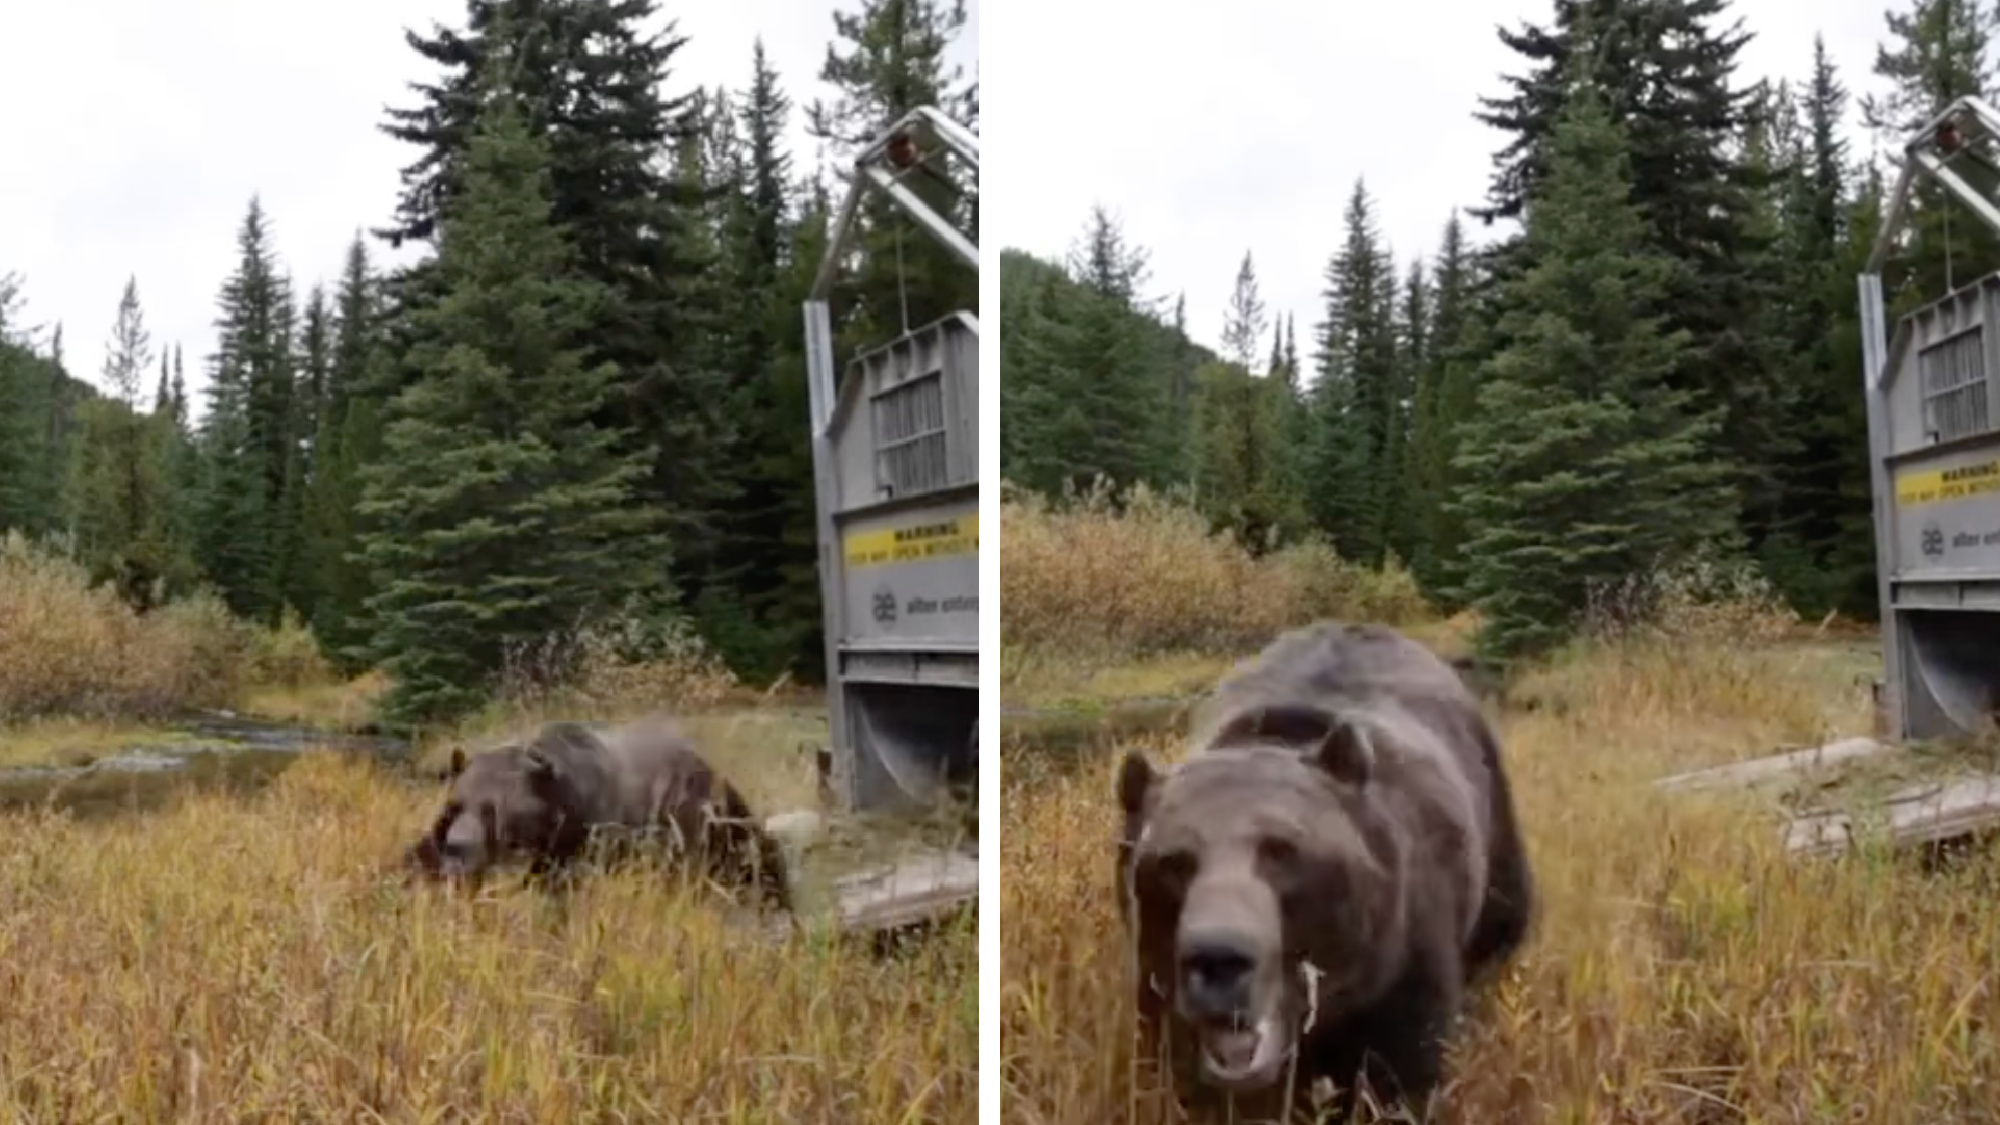 Watch a Grizzly Attack a Camera in the Backcountry